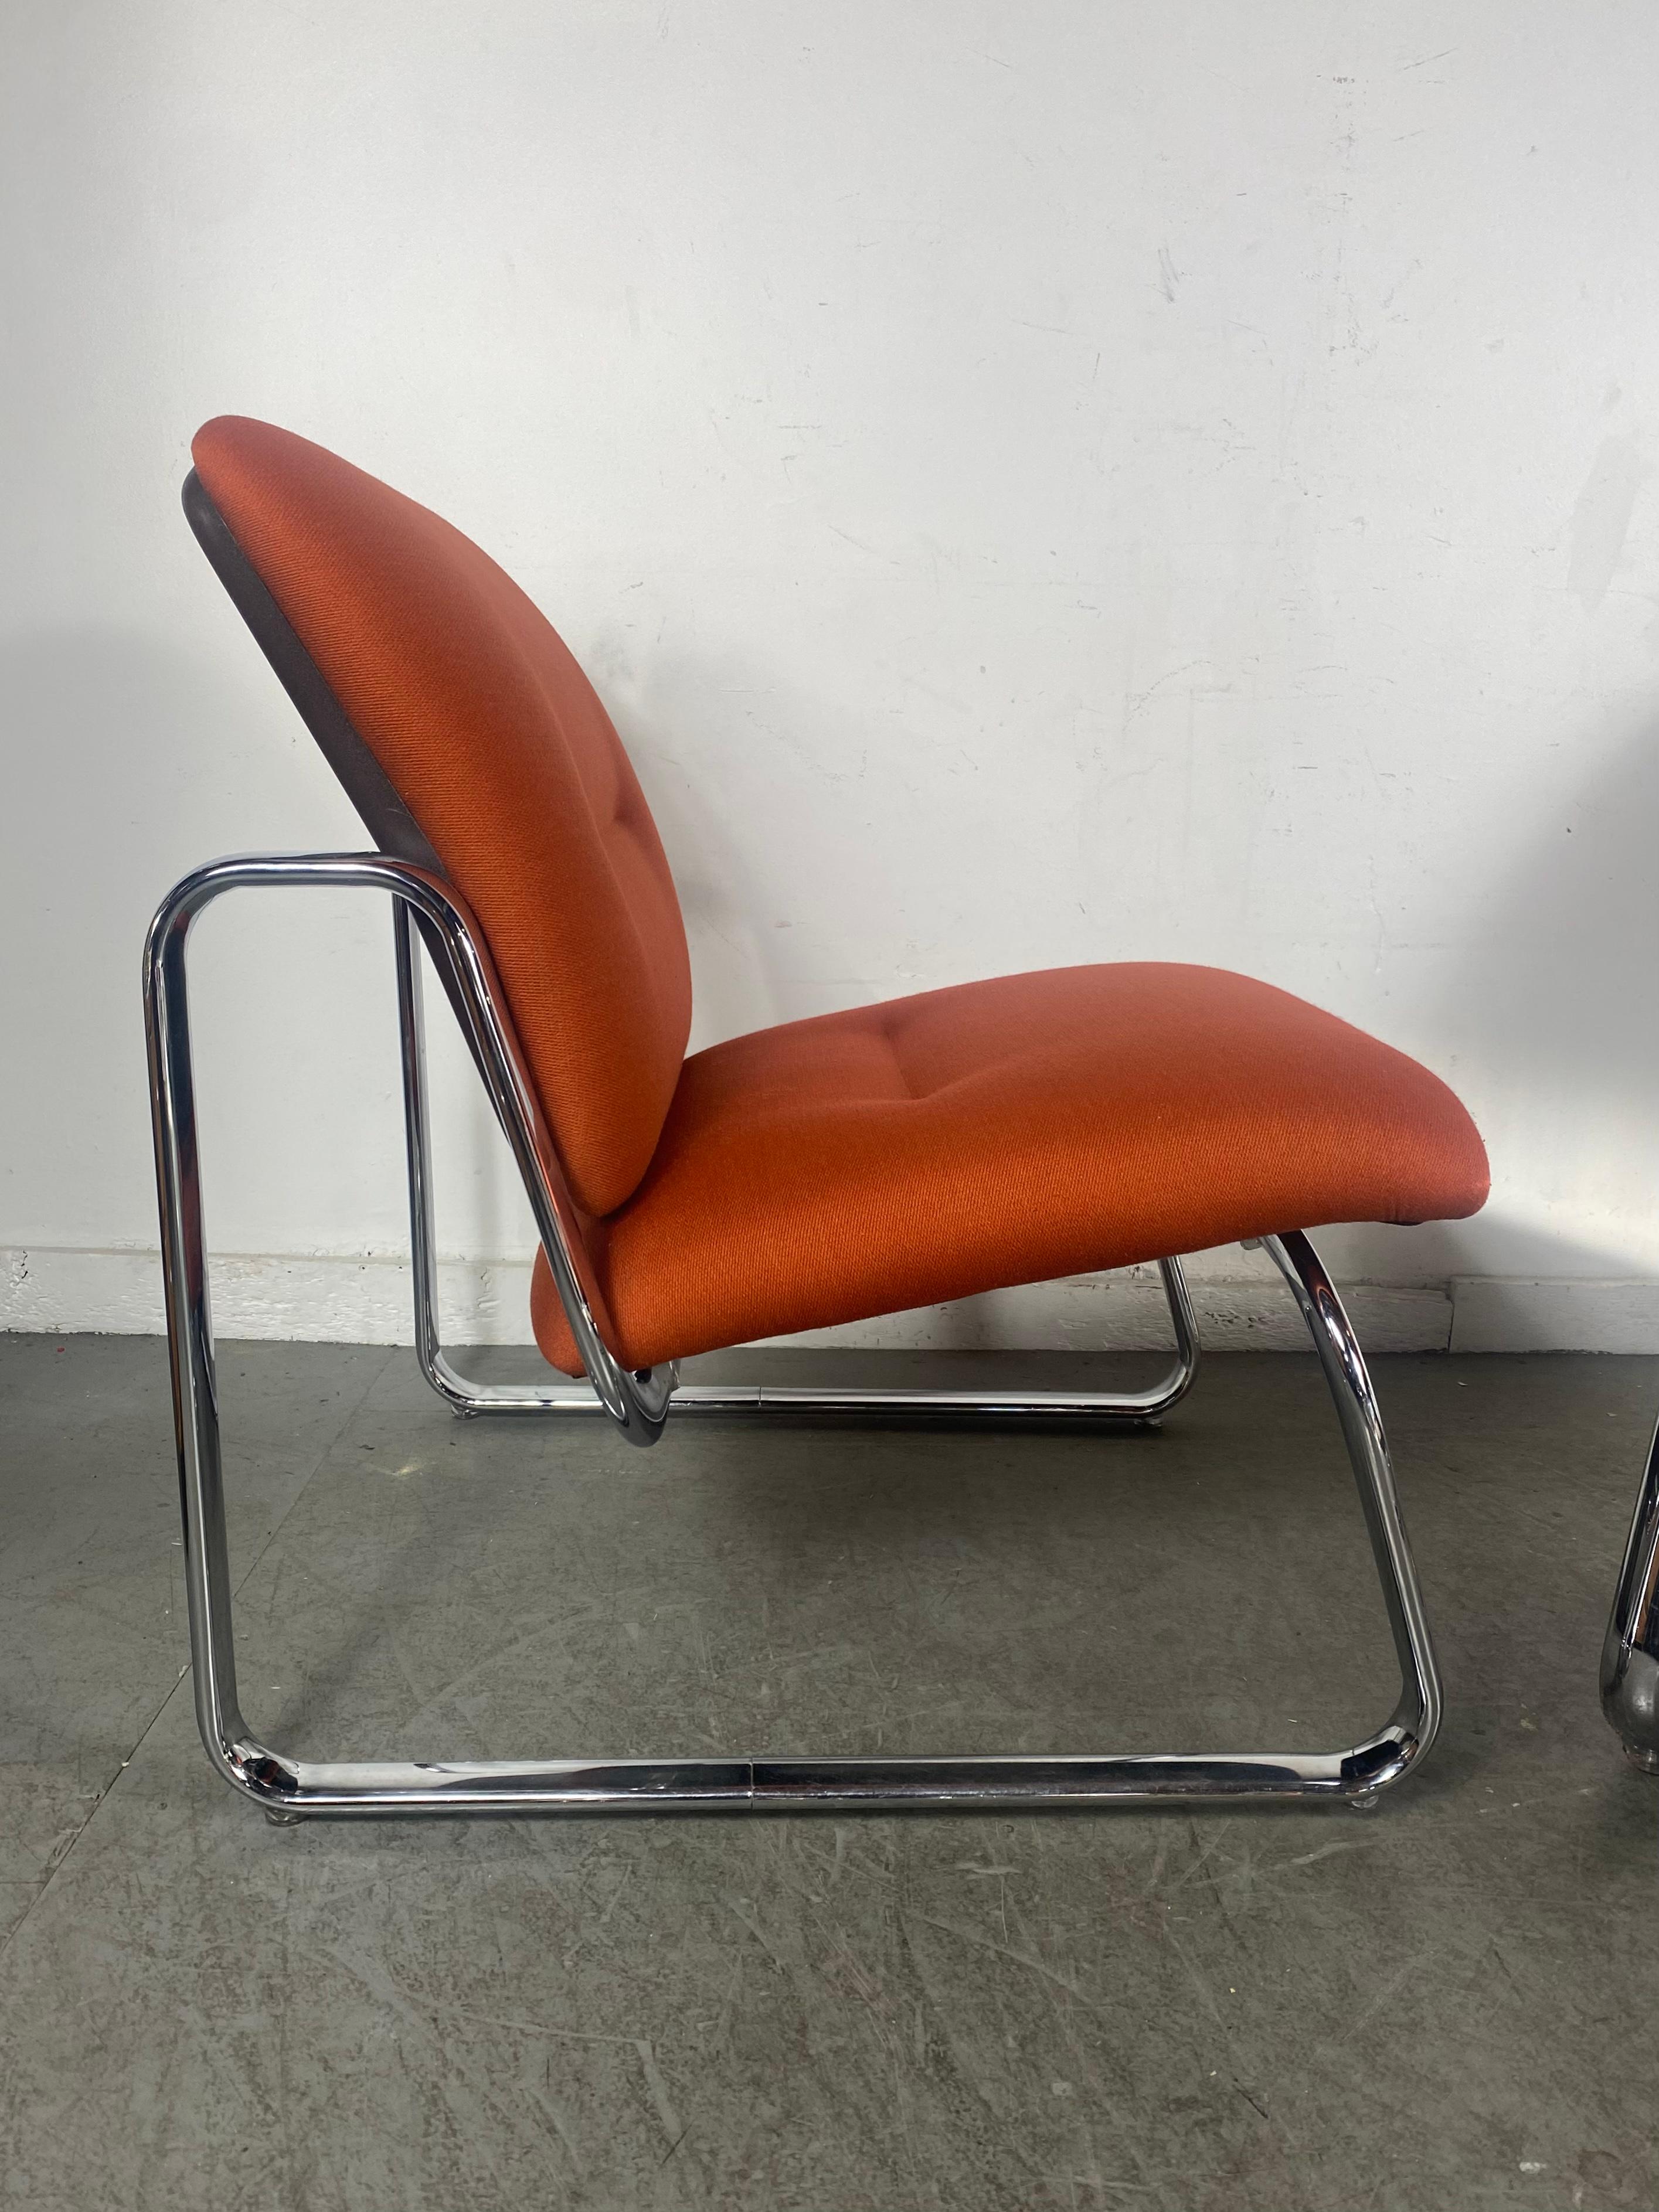 Matched Pair Space Age Modernist Lounge Chairs, Peter Protzmann/ Herman Miller For Sale 3